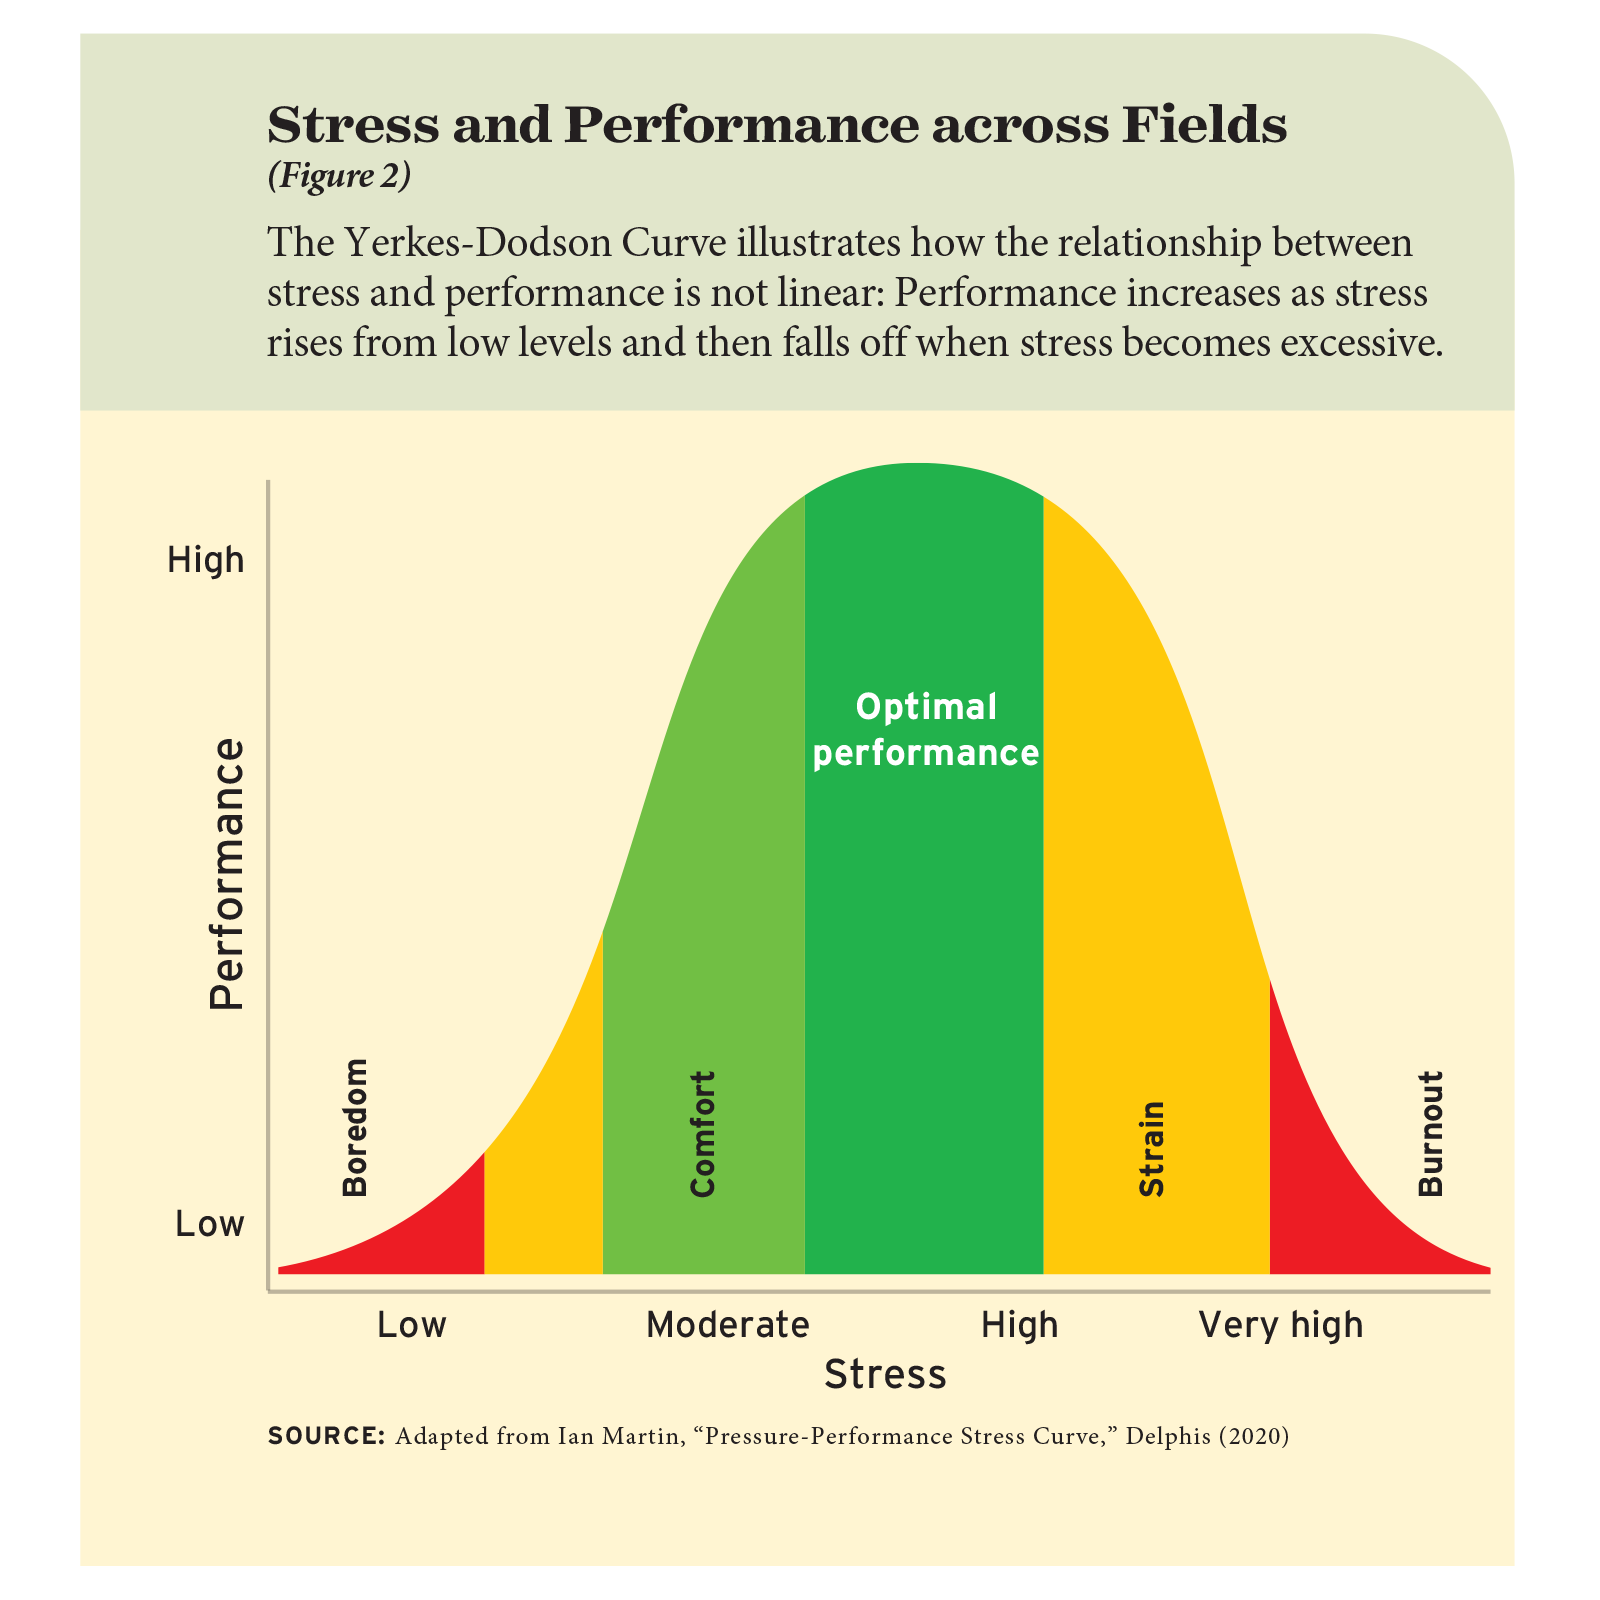 Figure 2: Stress and Performance across Fields